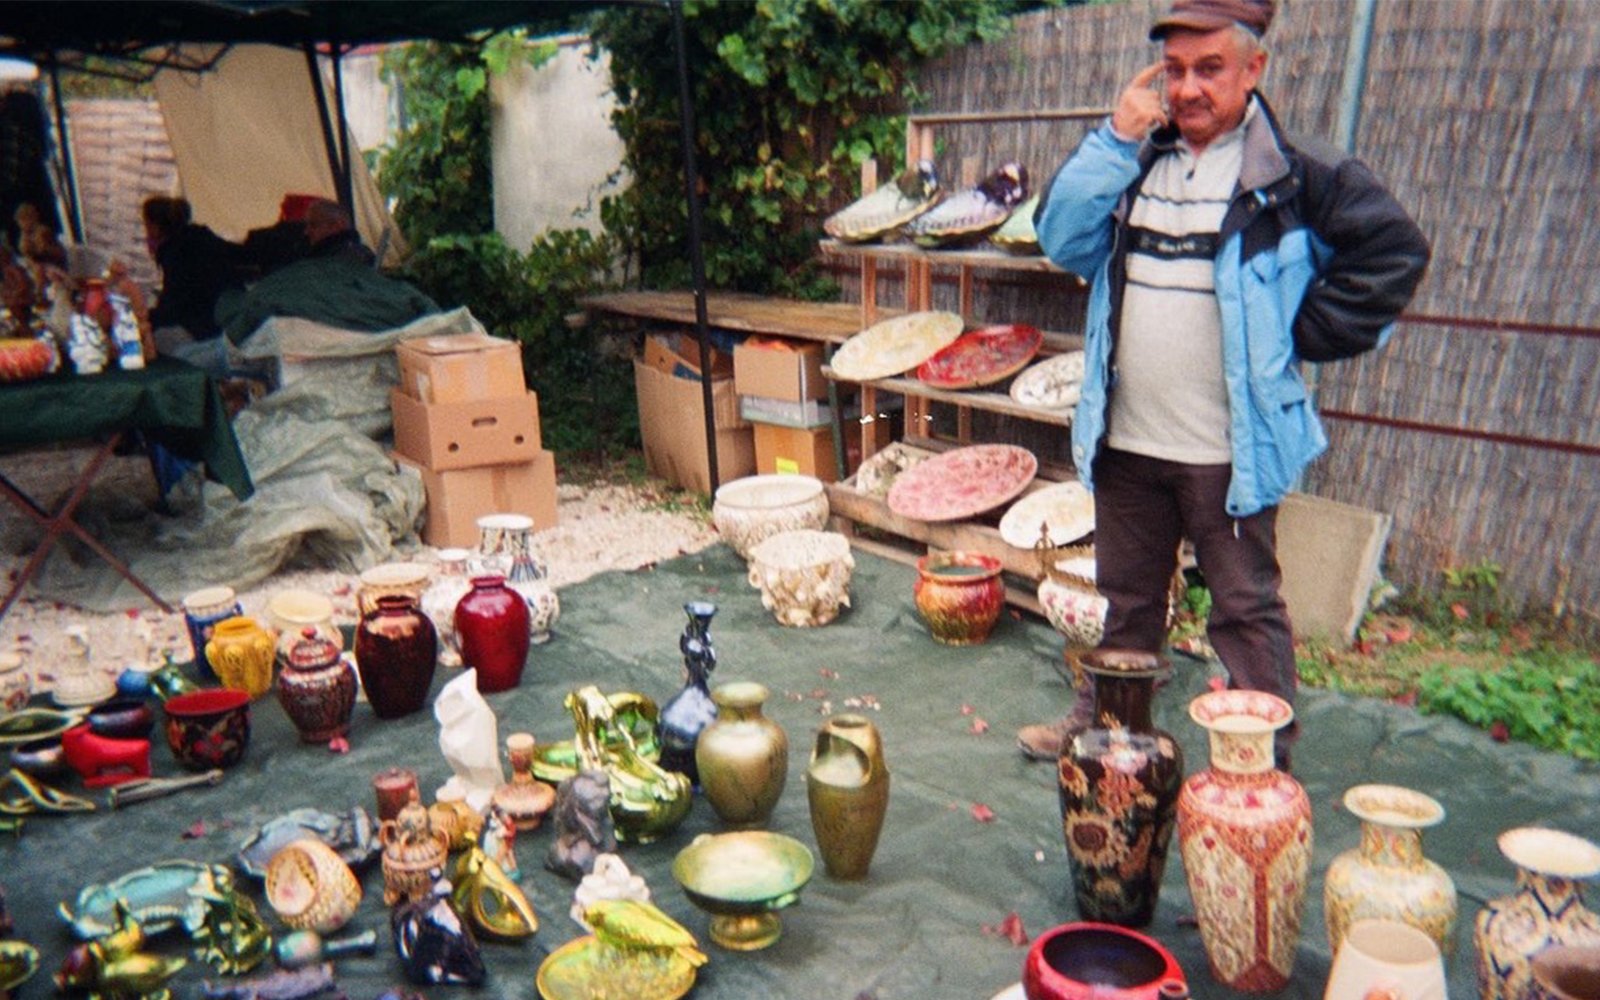 Man standing behind assortment of colorful vases on tarp outside